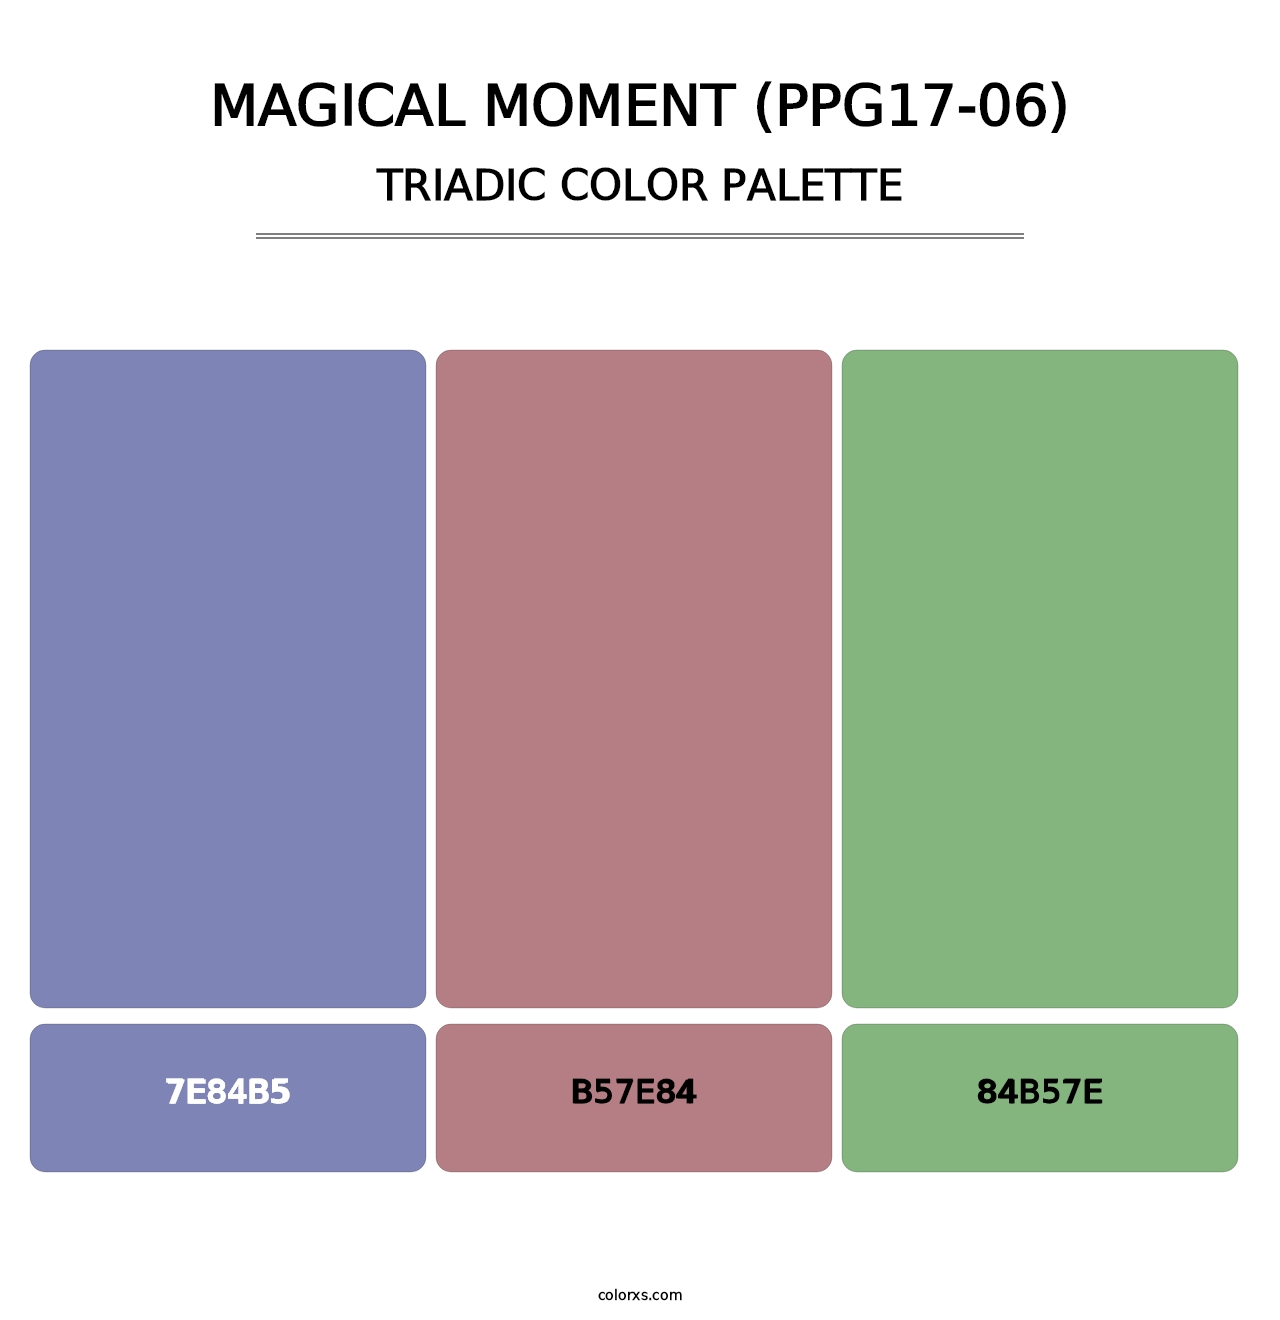 Magical Moment (PPG17-06) - Triadic Color Palette